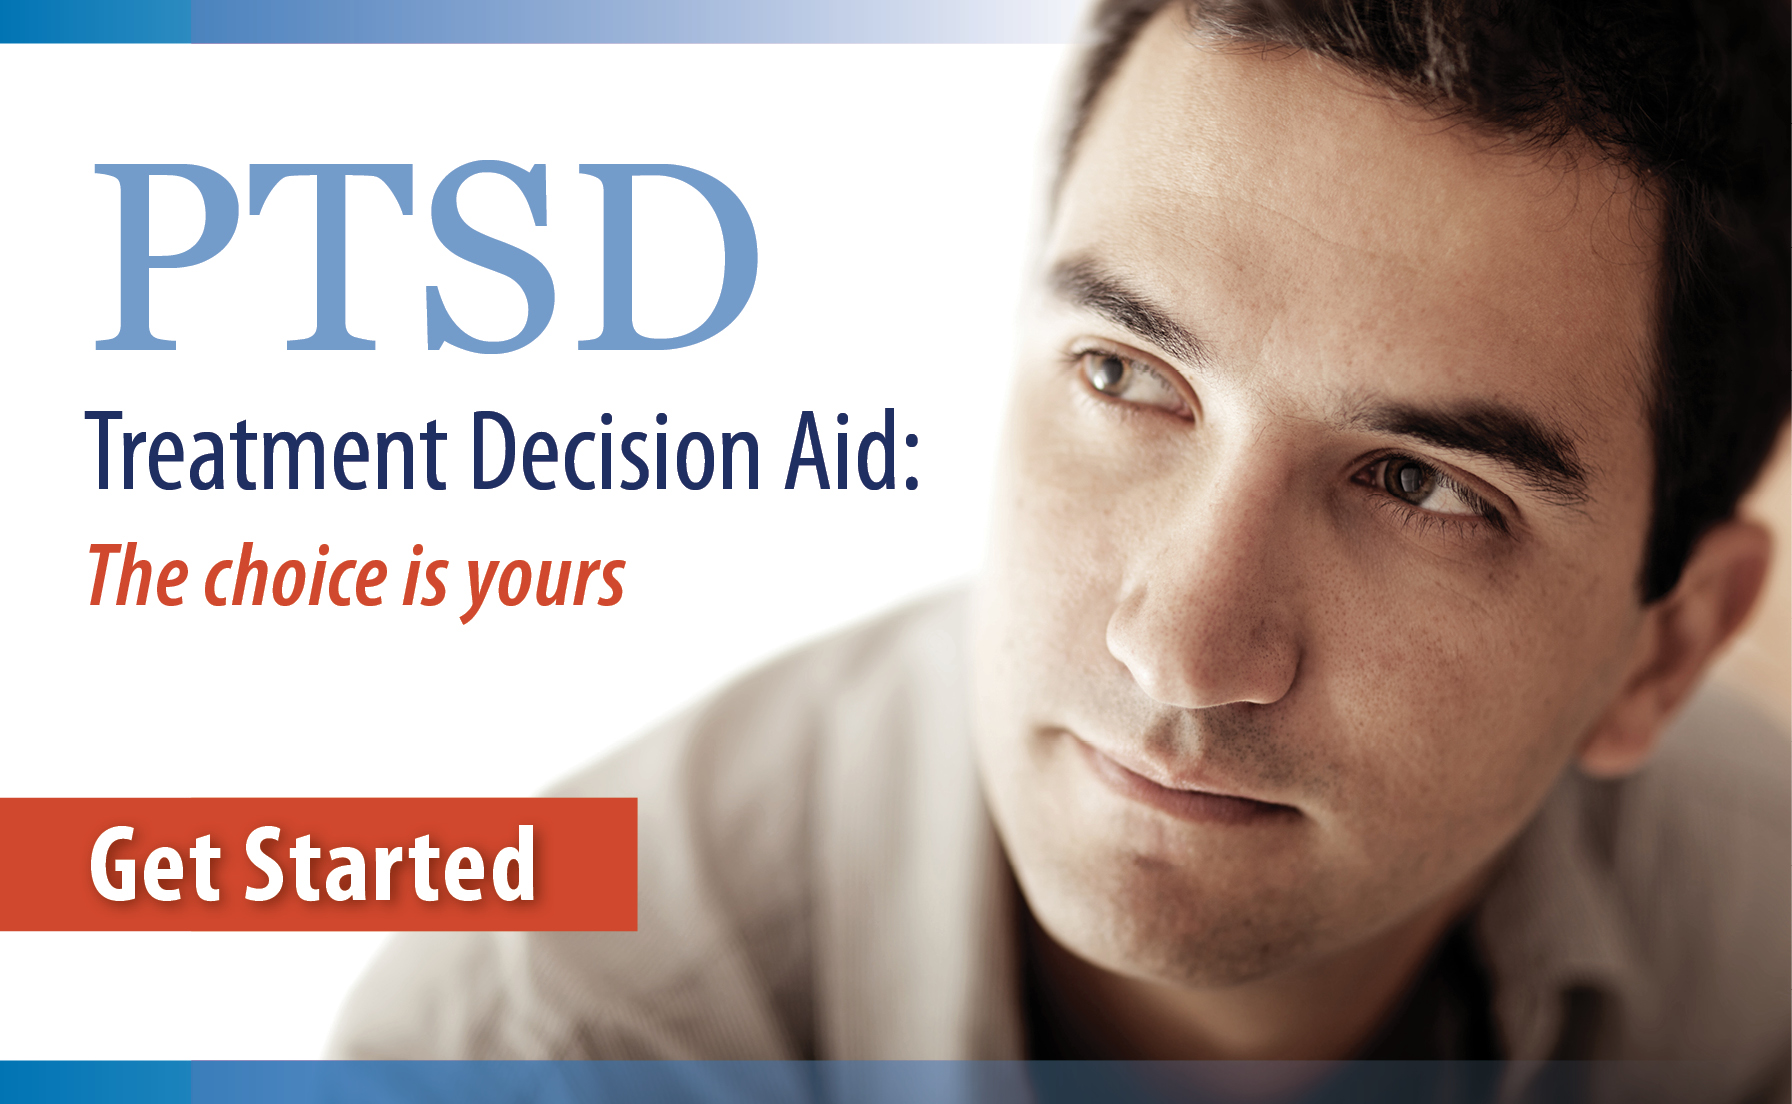 PTSD Treatment Decision Aid: The choice is yours. Get Started.